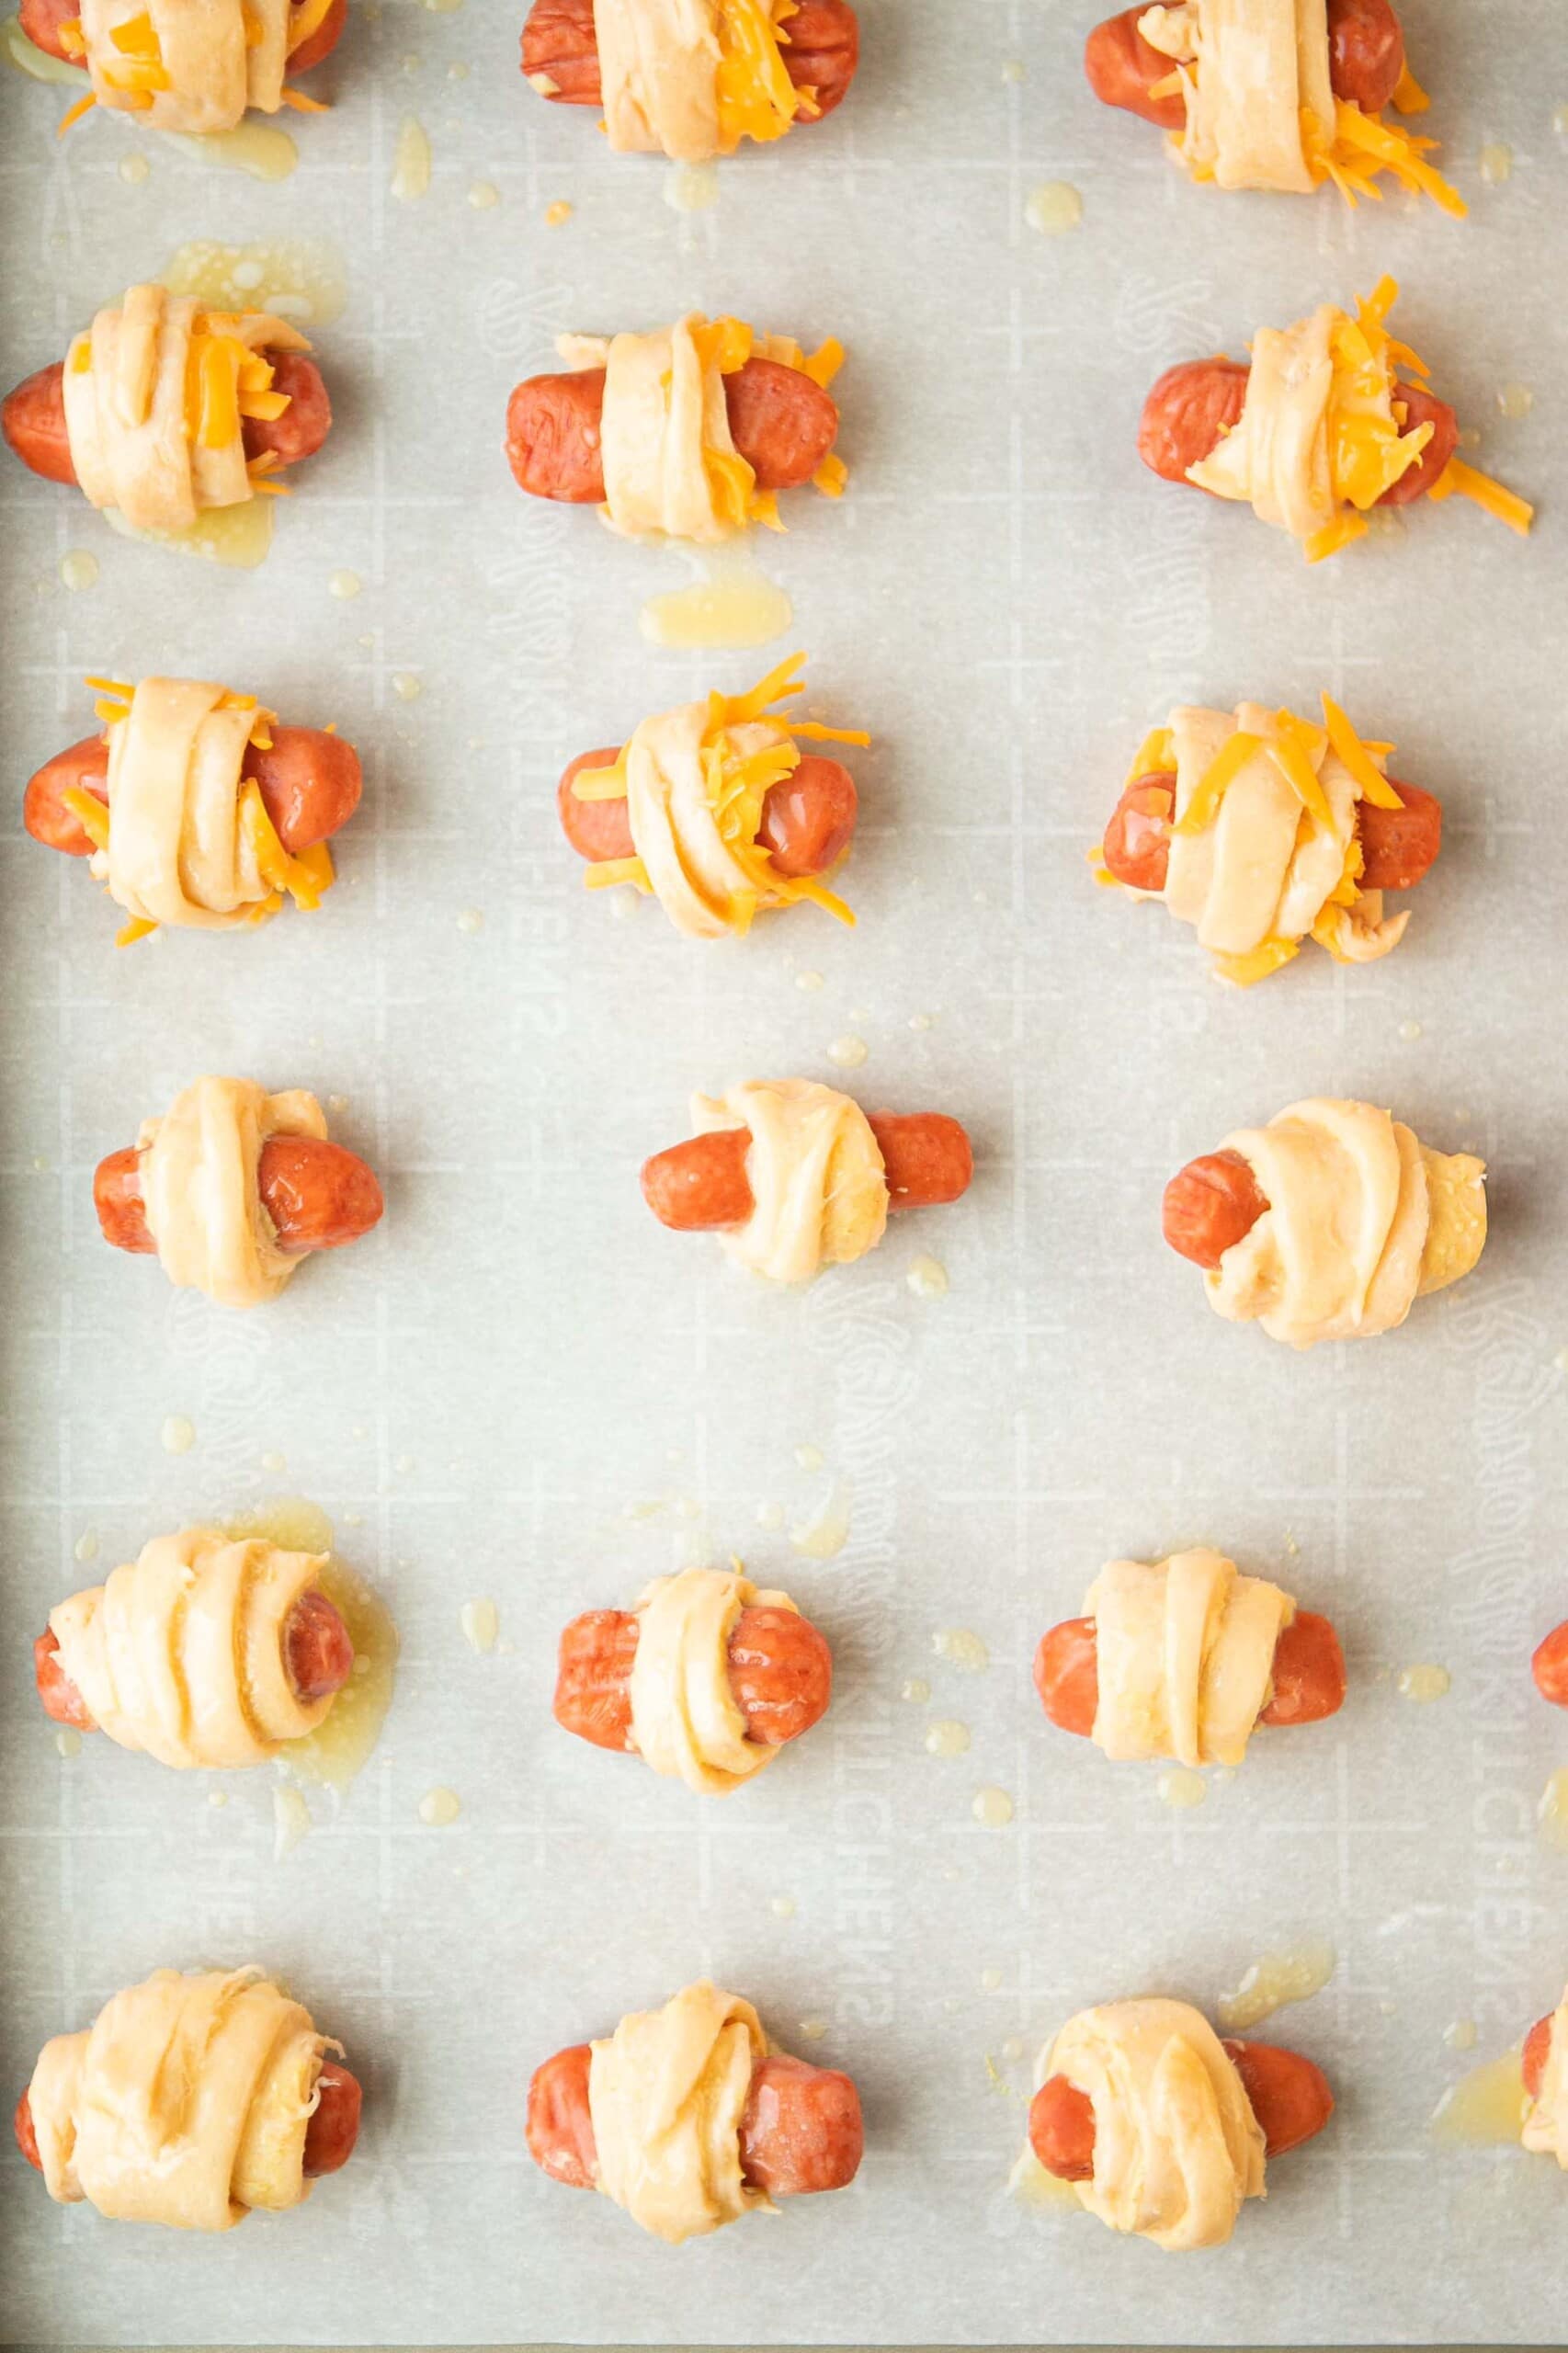 unbaked pigs in a blanket on baking sheet